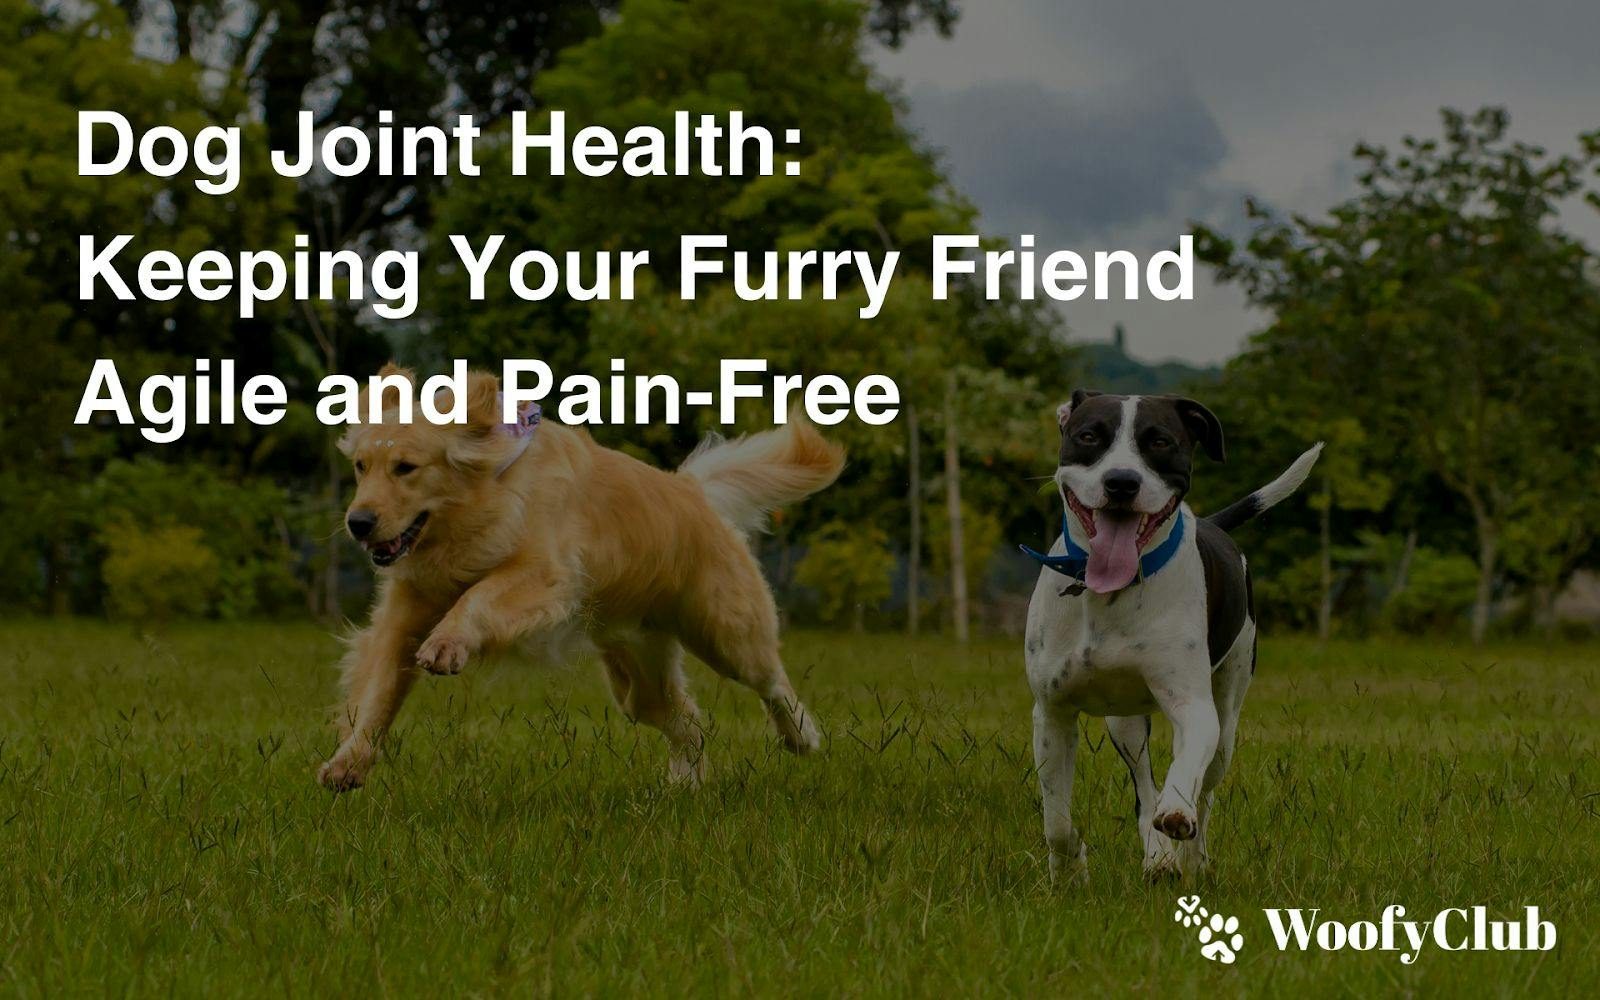 Dog Joint Health: Keeping Your Furry Friend Agile And Pain-Free